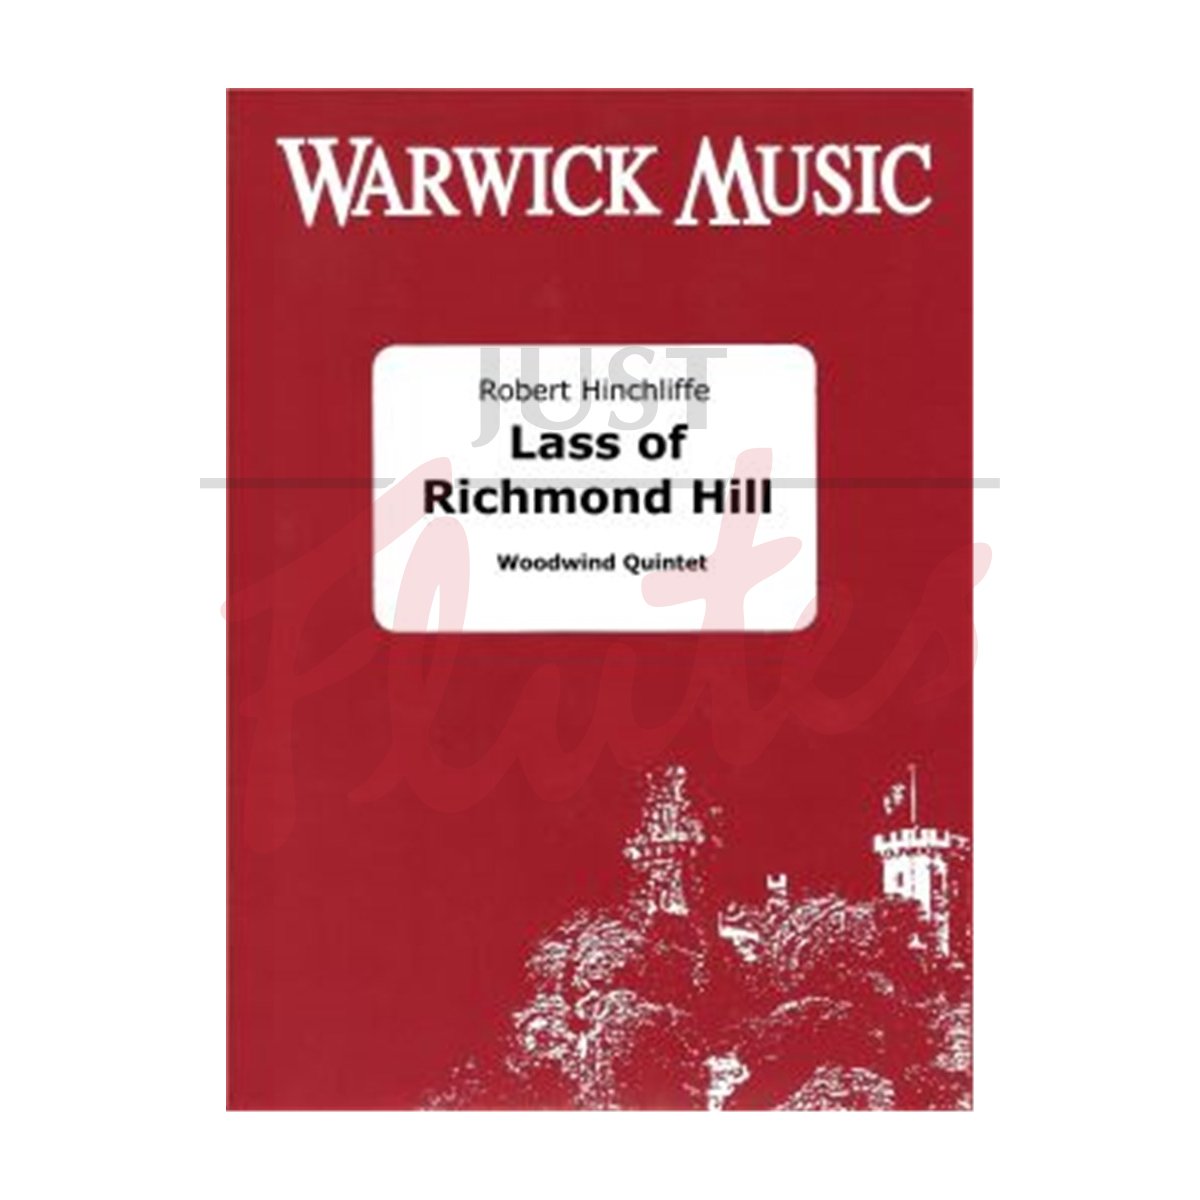 Lass of Richmond Hill: Variations for Woodwind Quintet